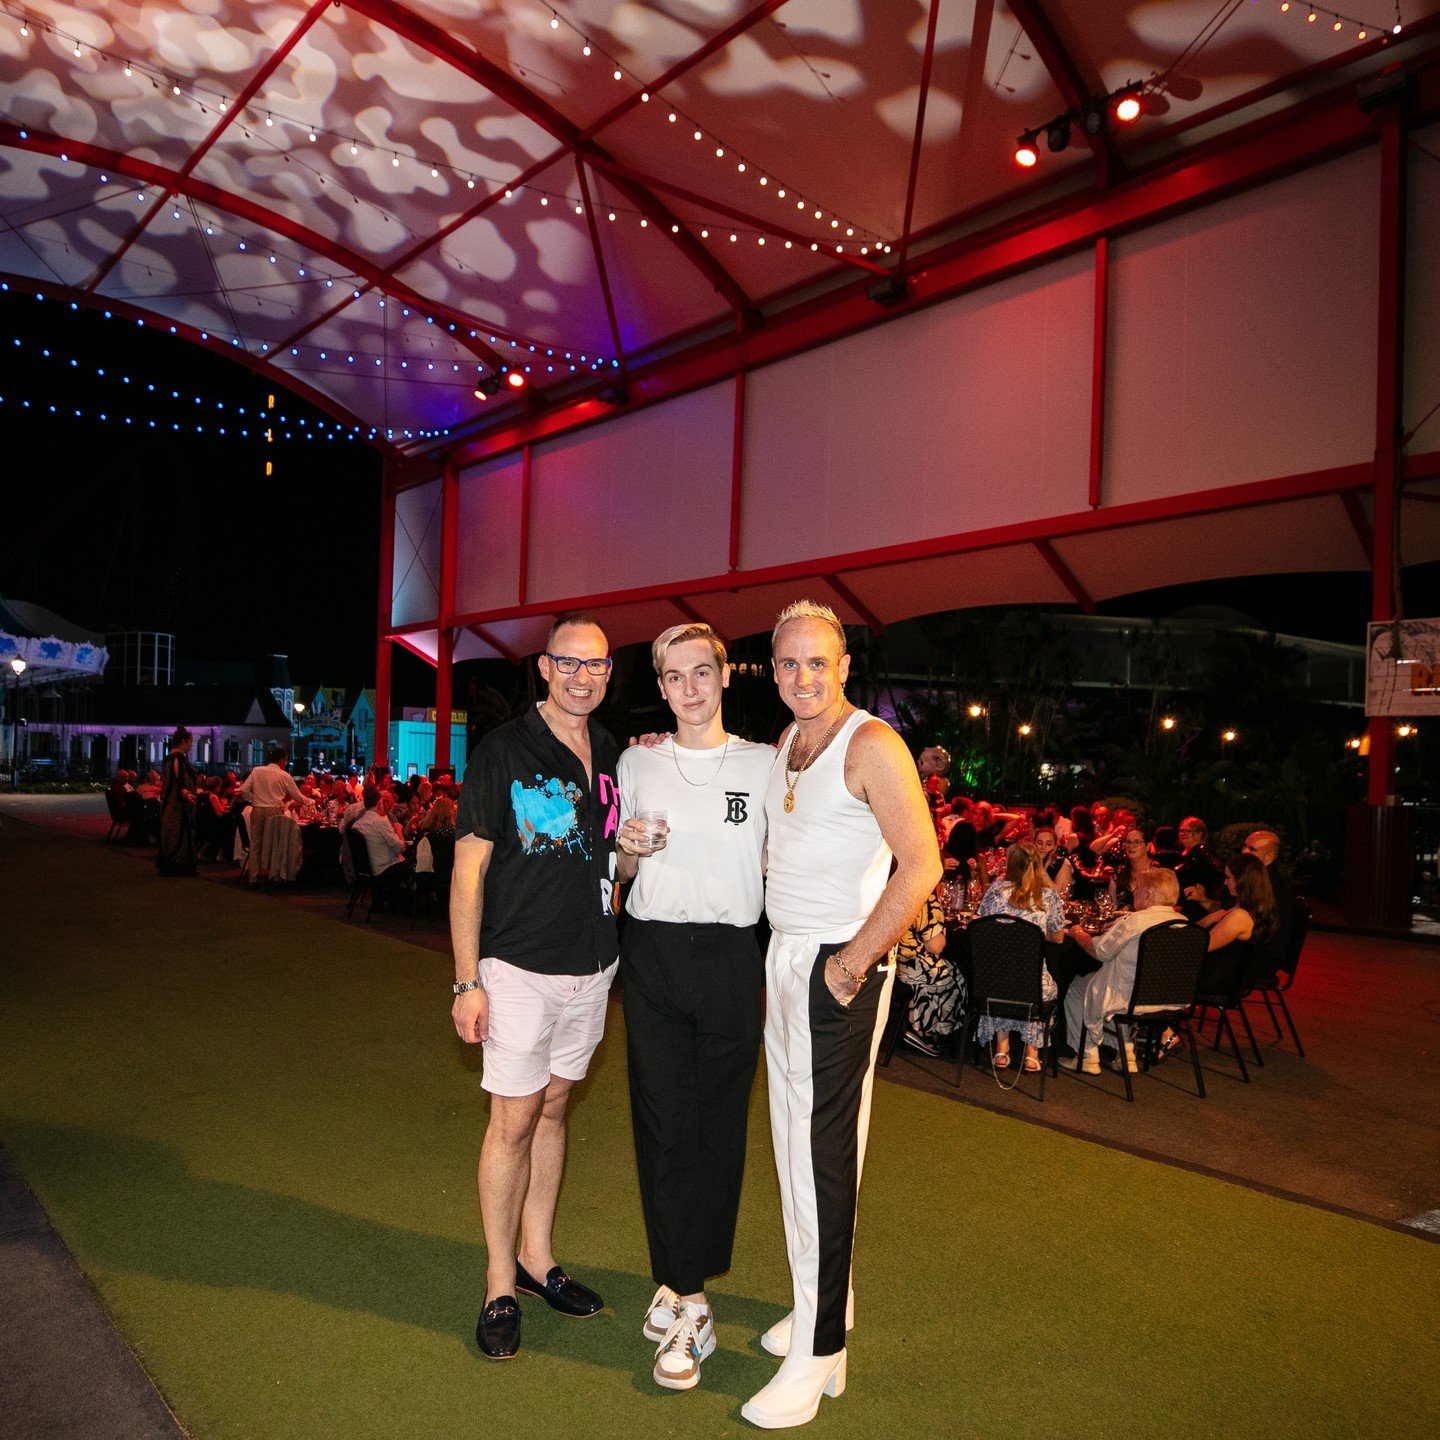 Teamwork makes the Dream (world) work! Over the coming weeks, we&rsquo;ll be introducing each of our team and showcasing their talents and skills, but first these cute shots from the team that worked our recent conference awards dinner at @dreamworld